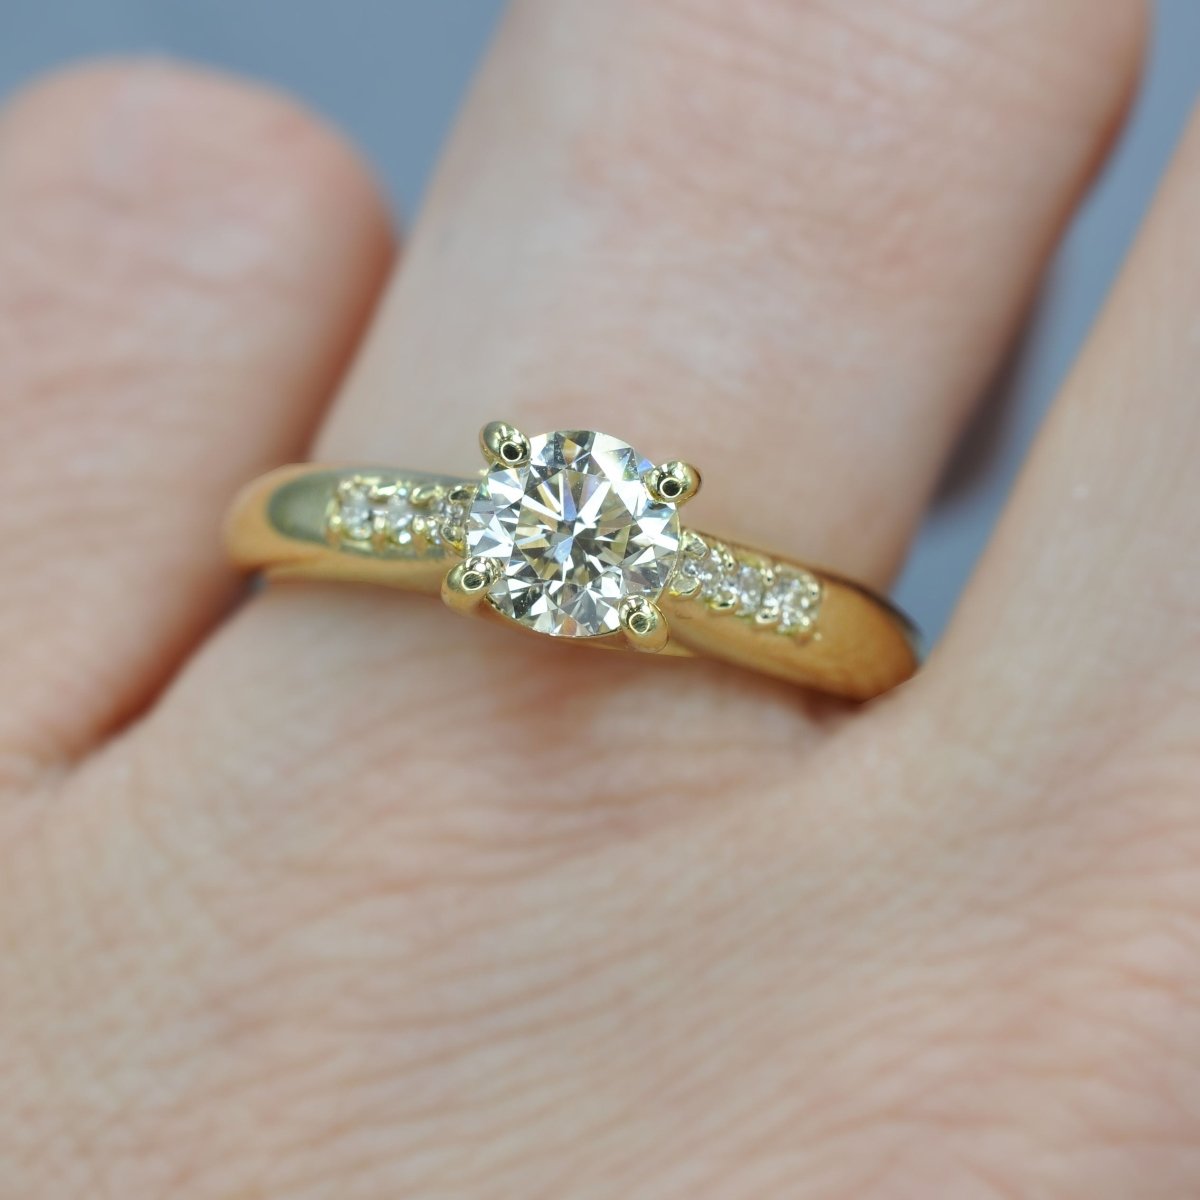 Certified 0.90CT Round Cut Diamond Engagement Ring in 18KT Yellow Gold - Primestyle.com